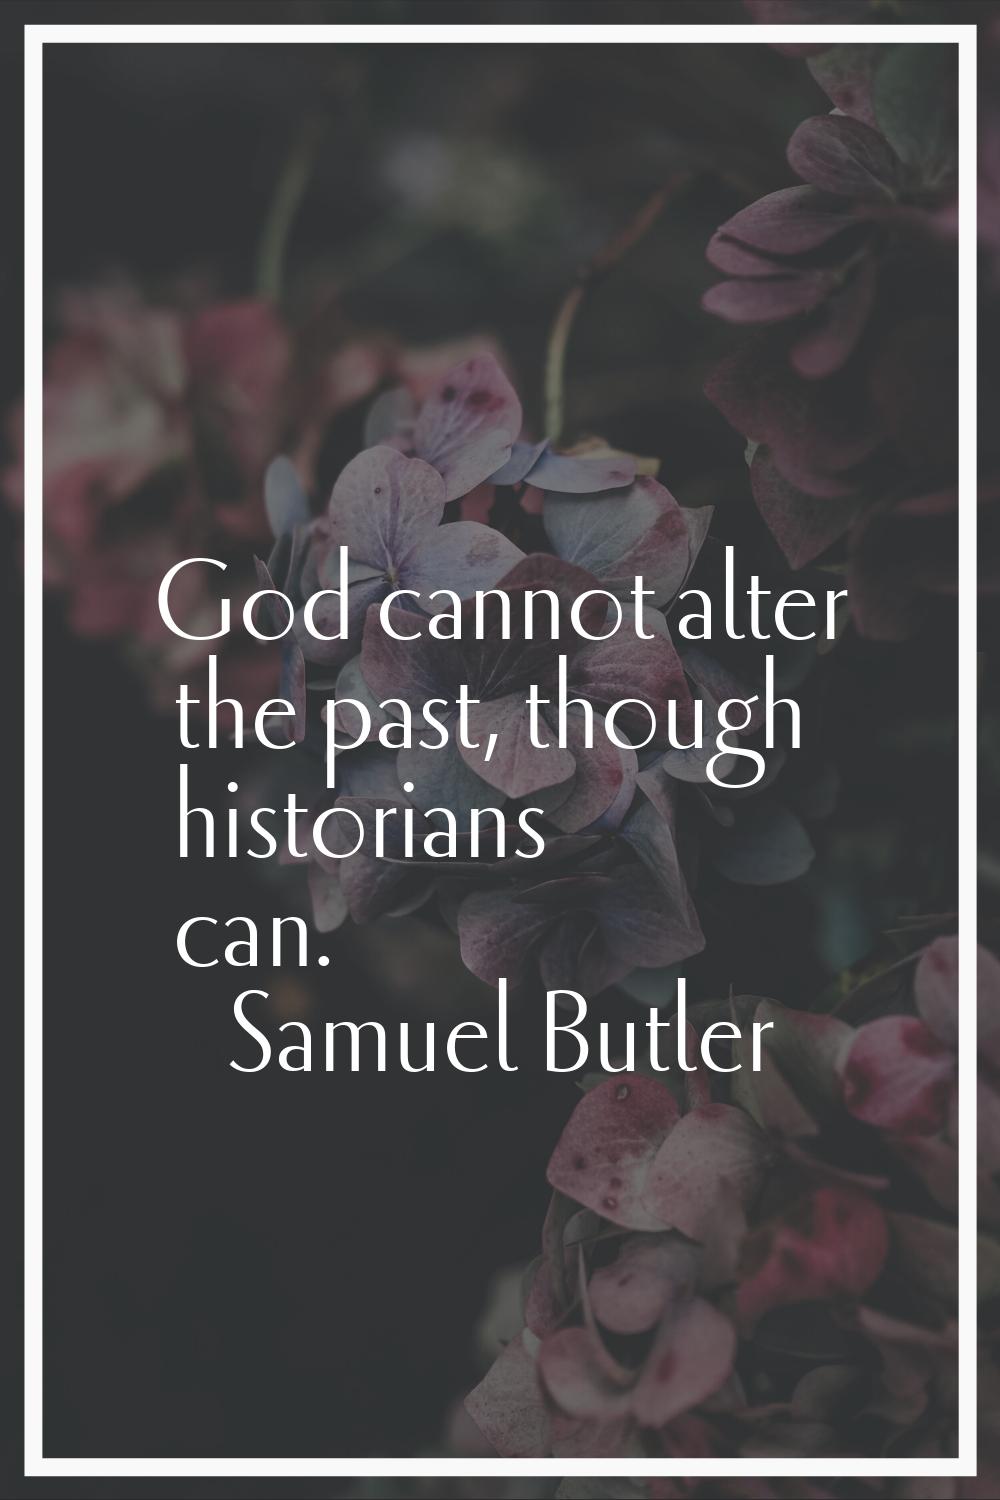 God cannot alter the past, though historians can.